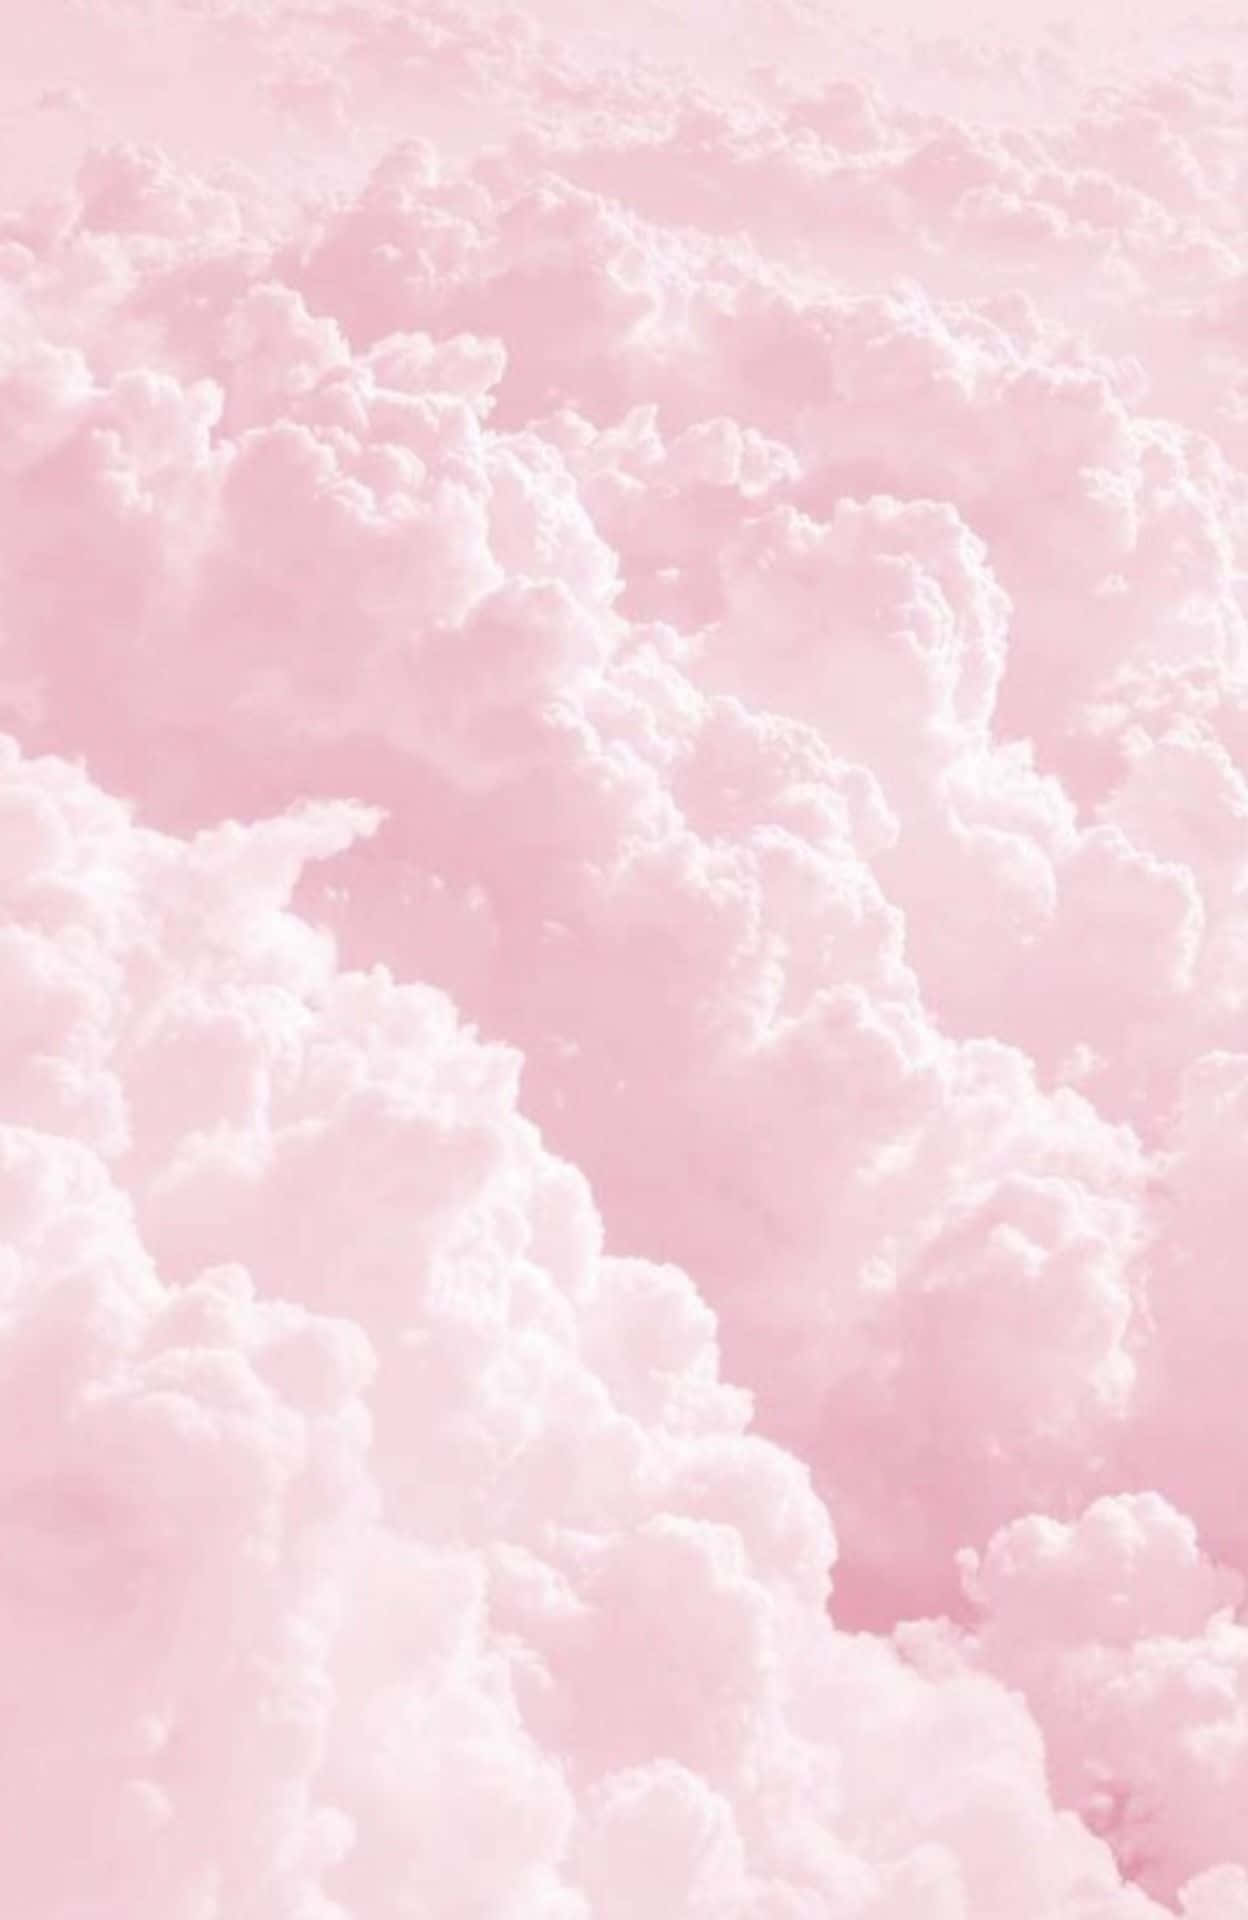 Soft pastel pink background with a faded delight